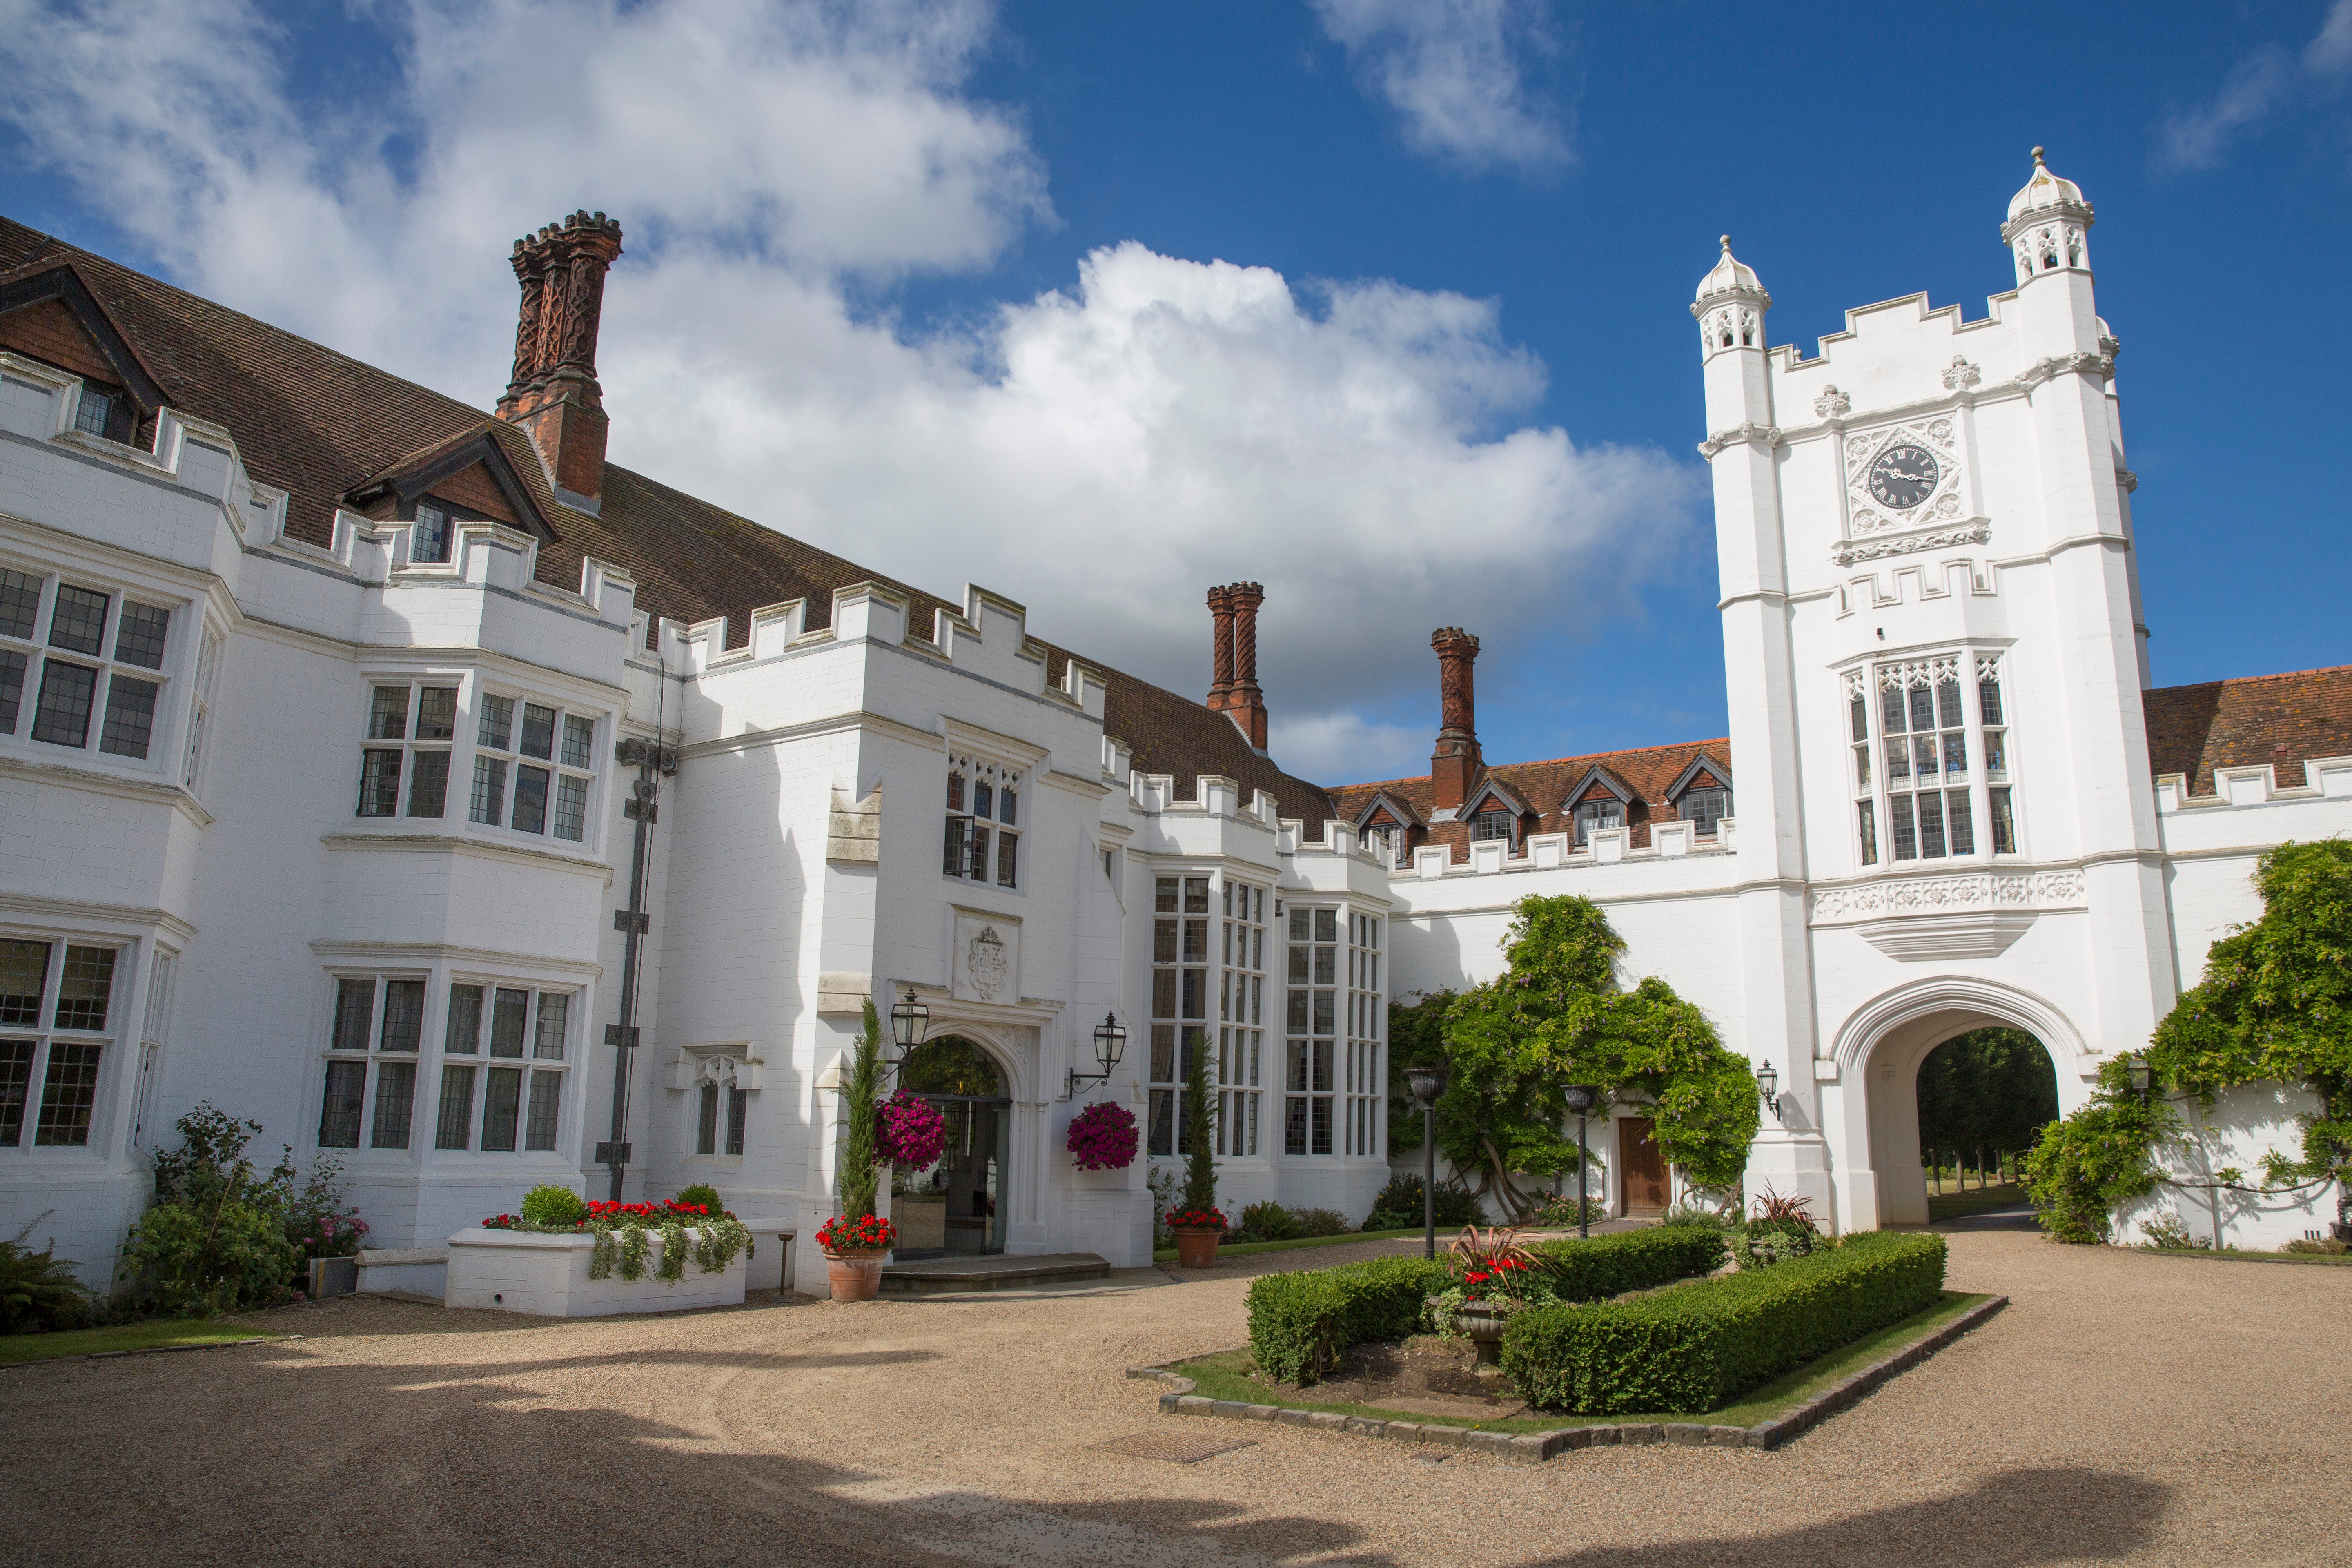 Danesfield House Hotel in the Chilterns